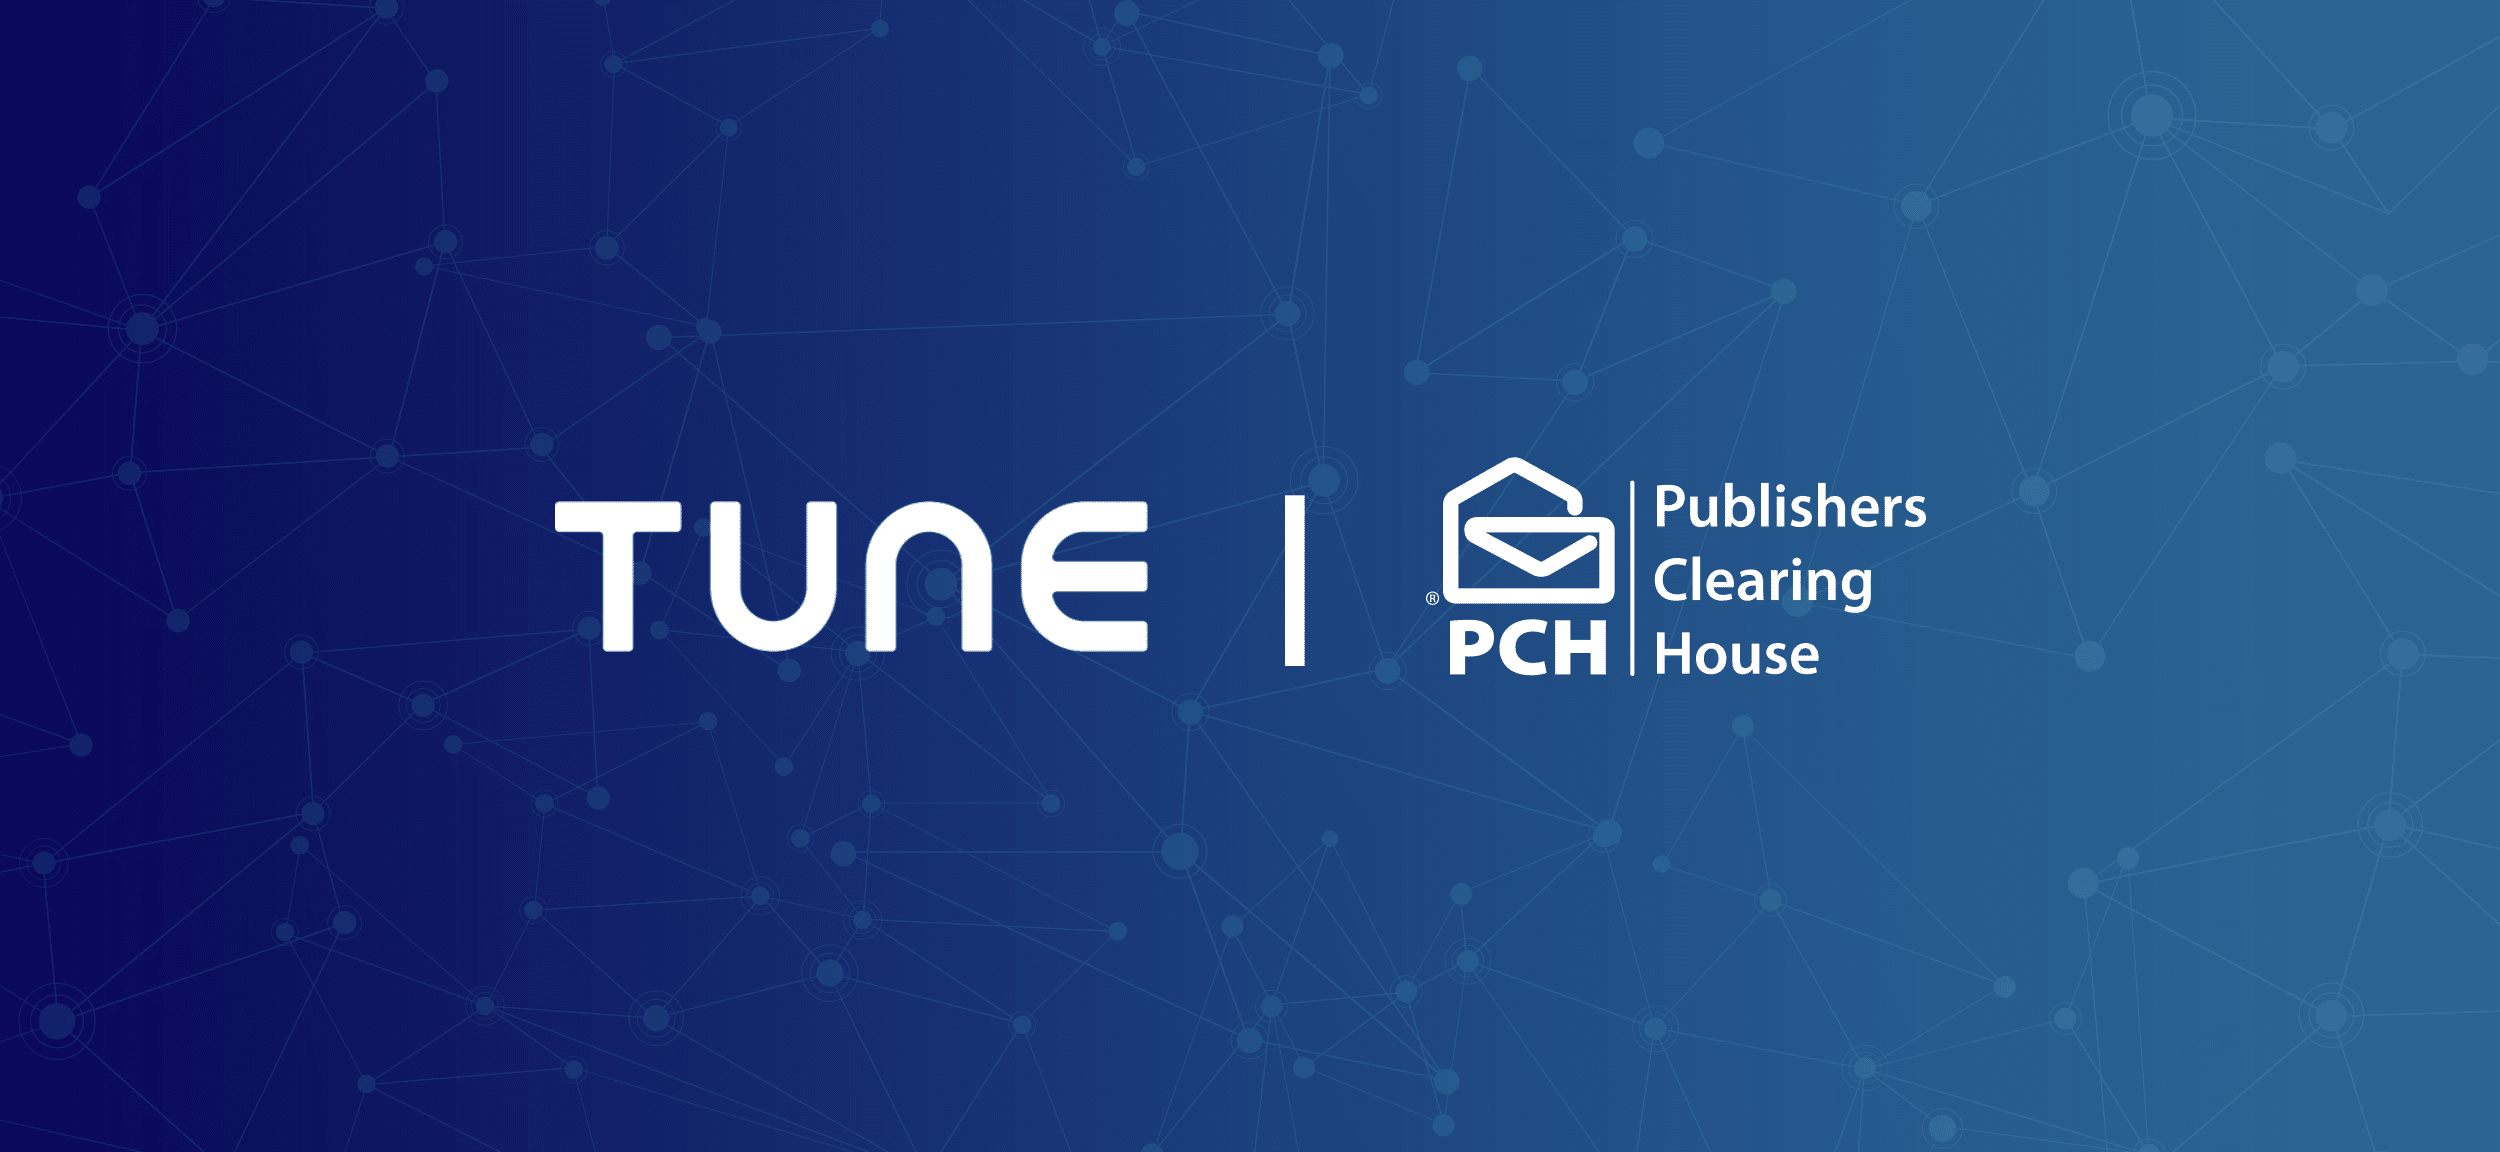 May TUNE Connect Partner Spotlight featuring PCH, Publishers Clearing House